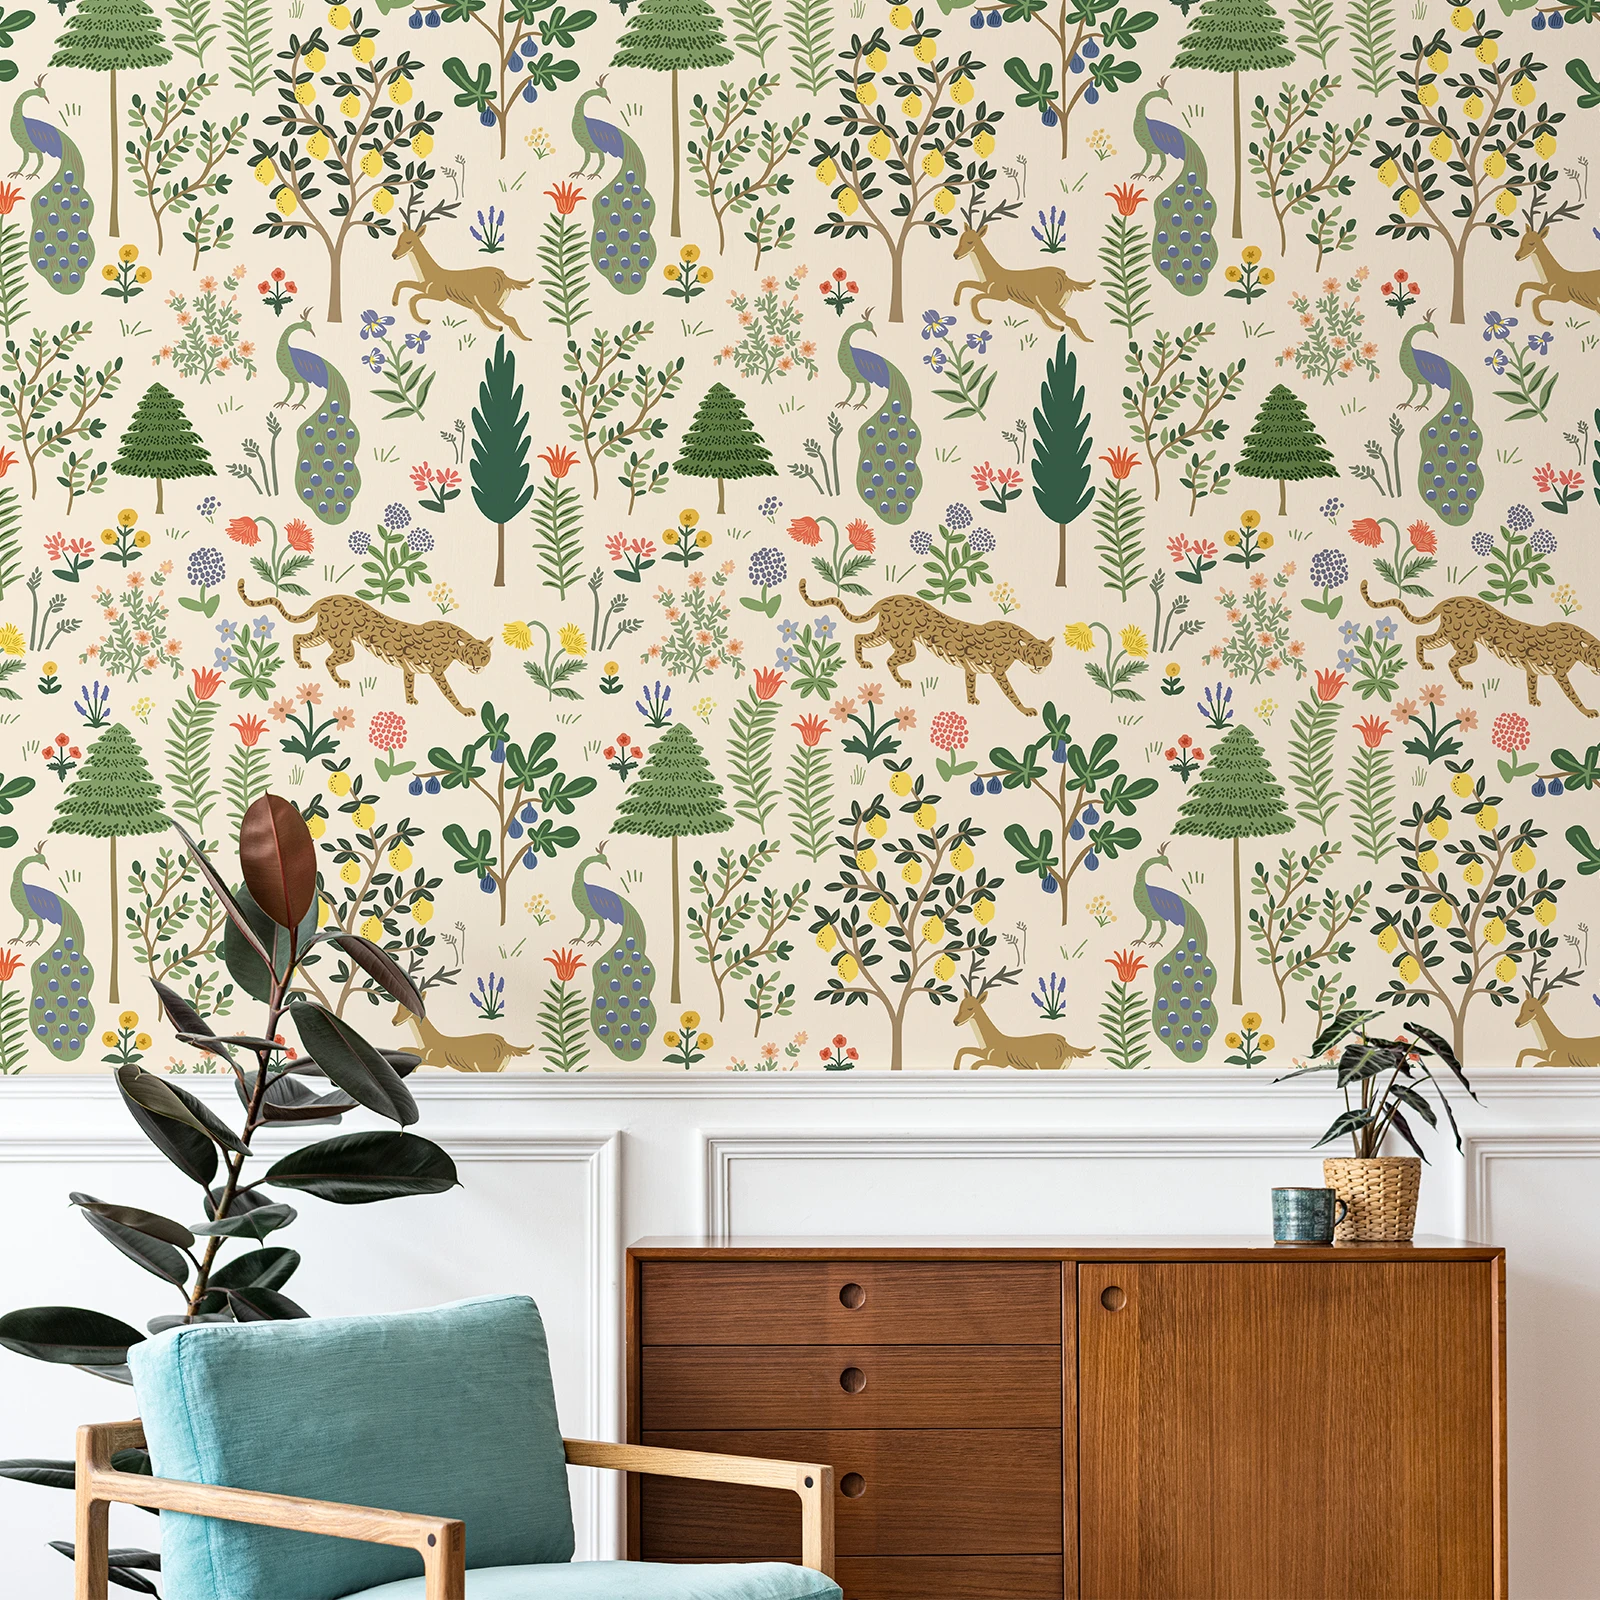 Vintage Leaves Trees Peel And Stick Wallpaper Retro Floral Yellow Animal Waterproof Home Decor Forest Self Adhesive Wall Sticker